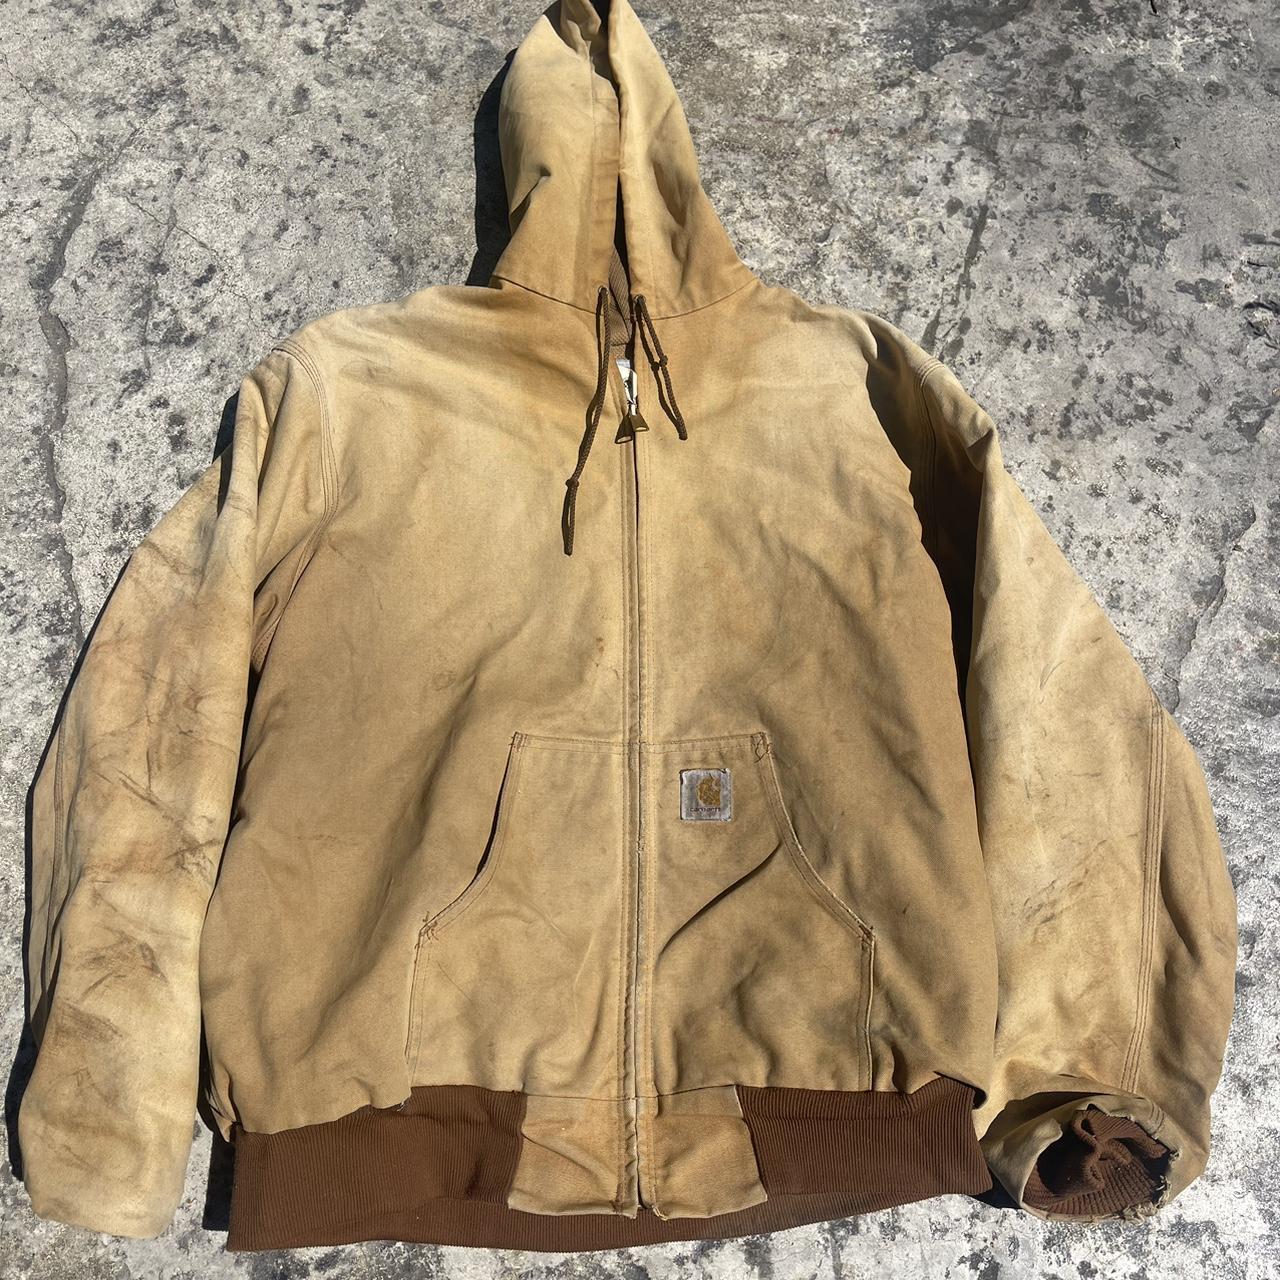 carhartt work jacket used but still has some life in it - Depop